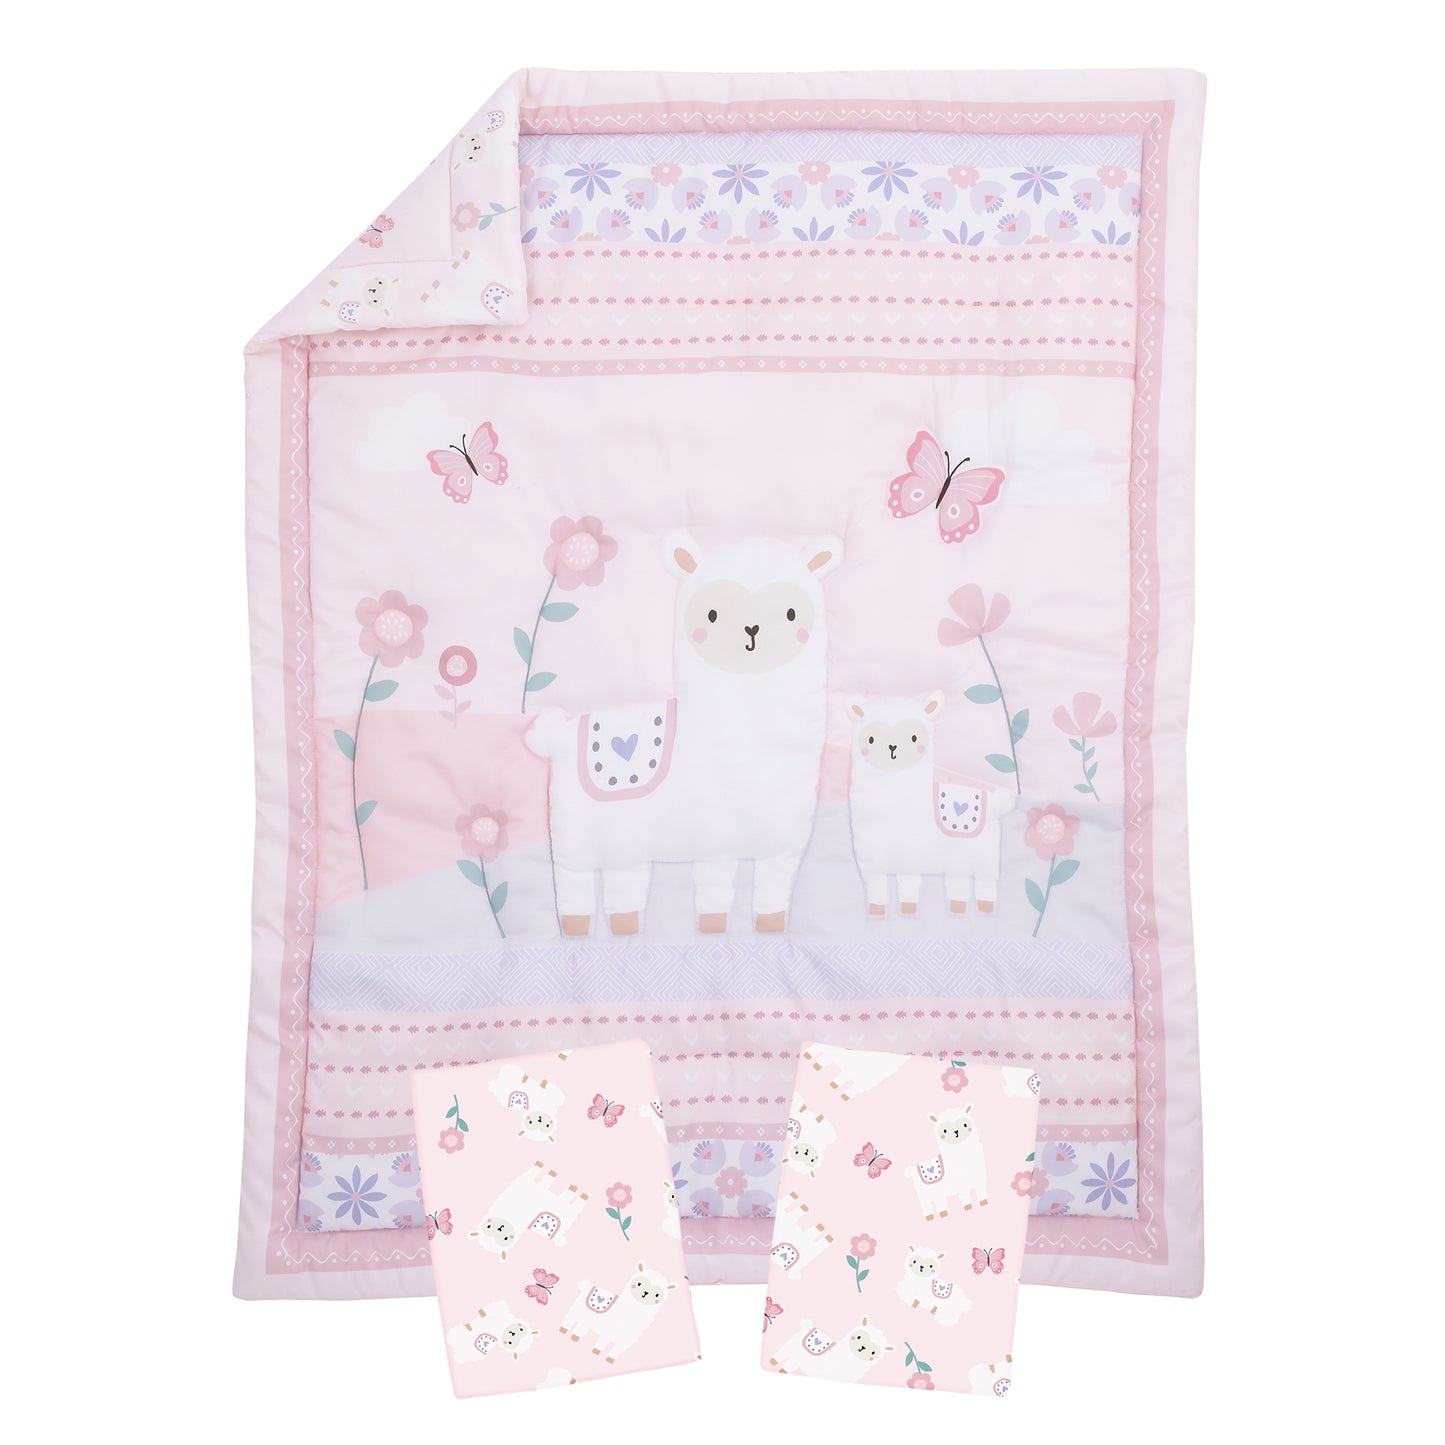 Little Love by NoJo Sweet Llama and Butterflies Floral Pink and Purple 3 Piece Mini Crib Bedding Set - Comforter and 2 Mini Crib Sheets